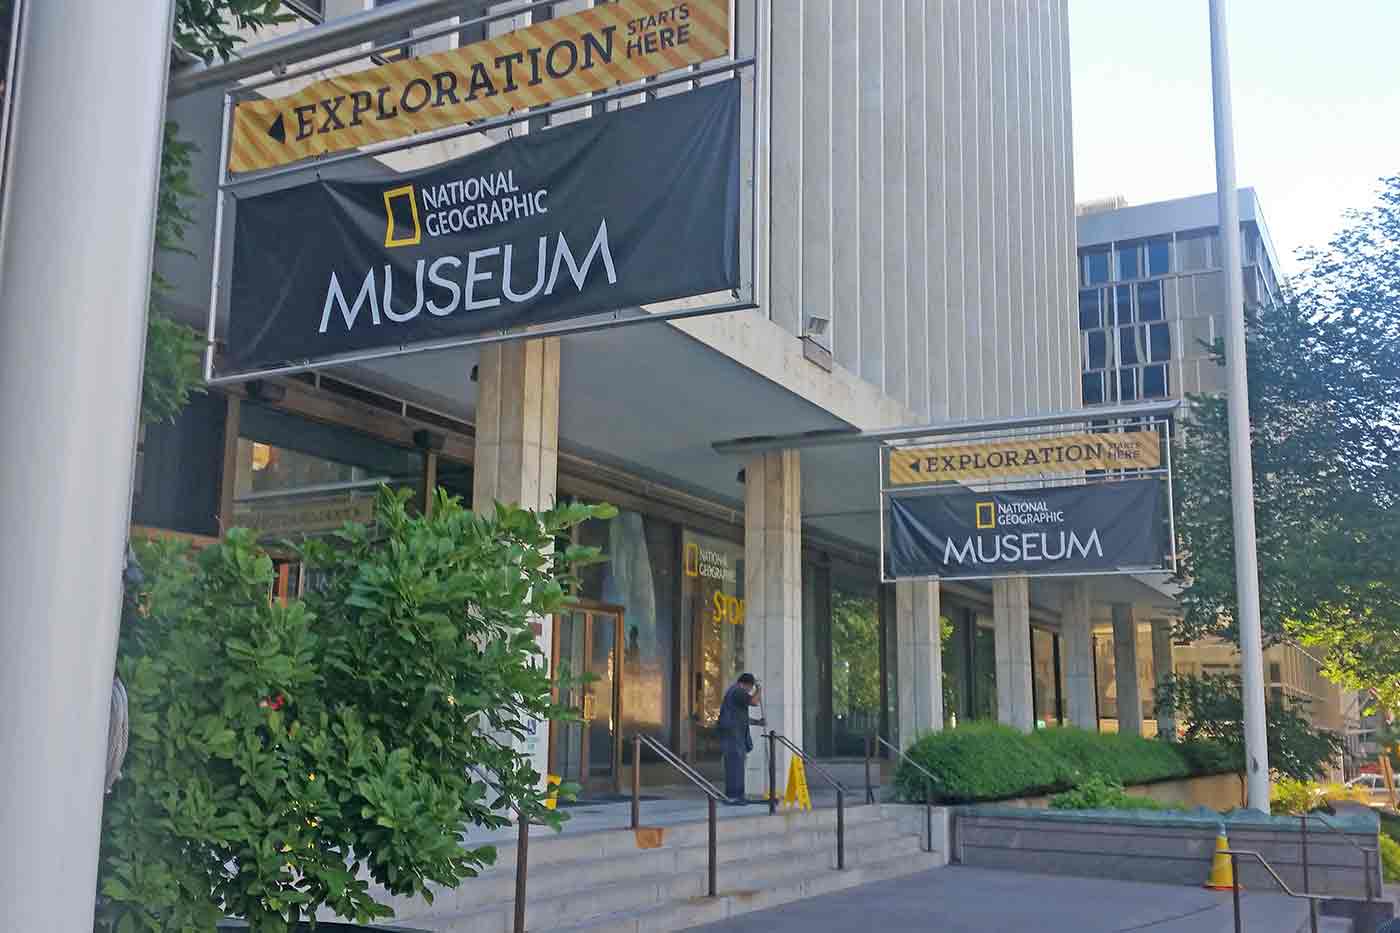 The National Geographic Museum